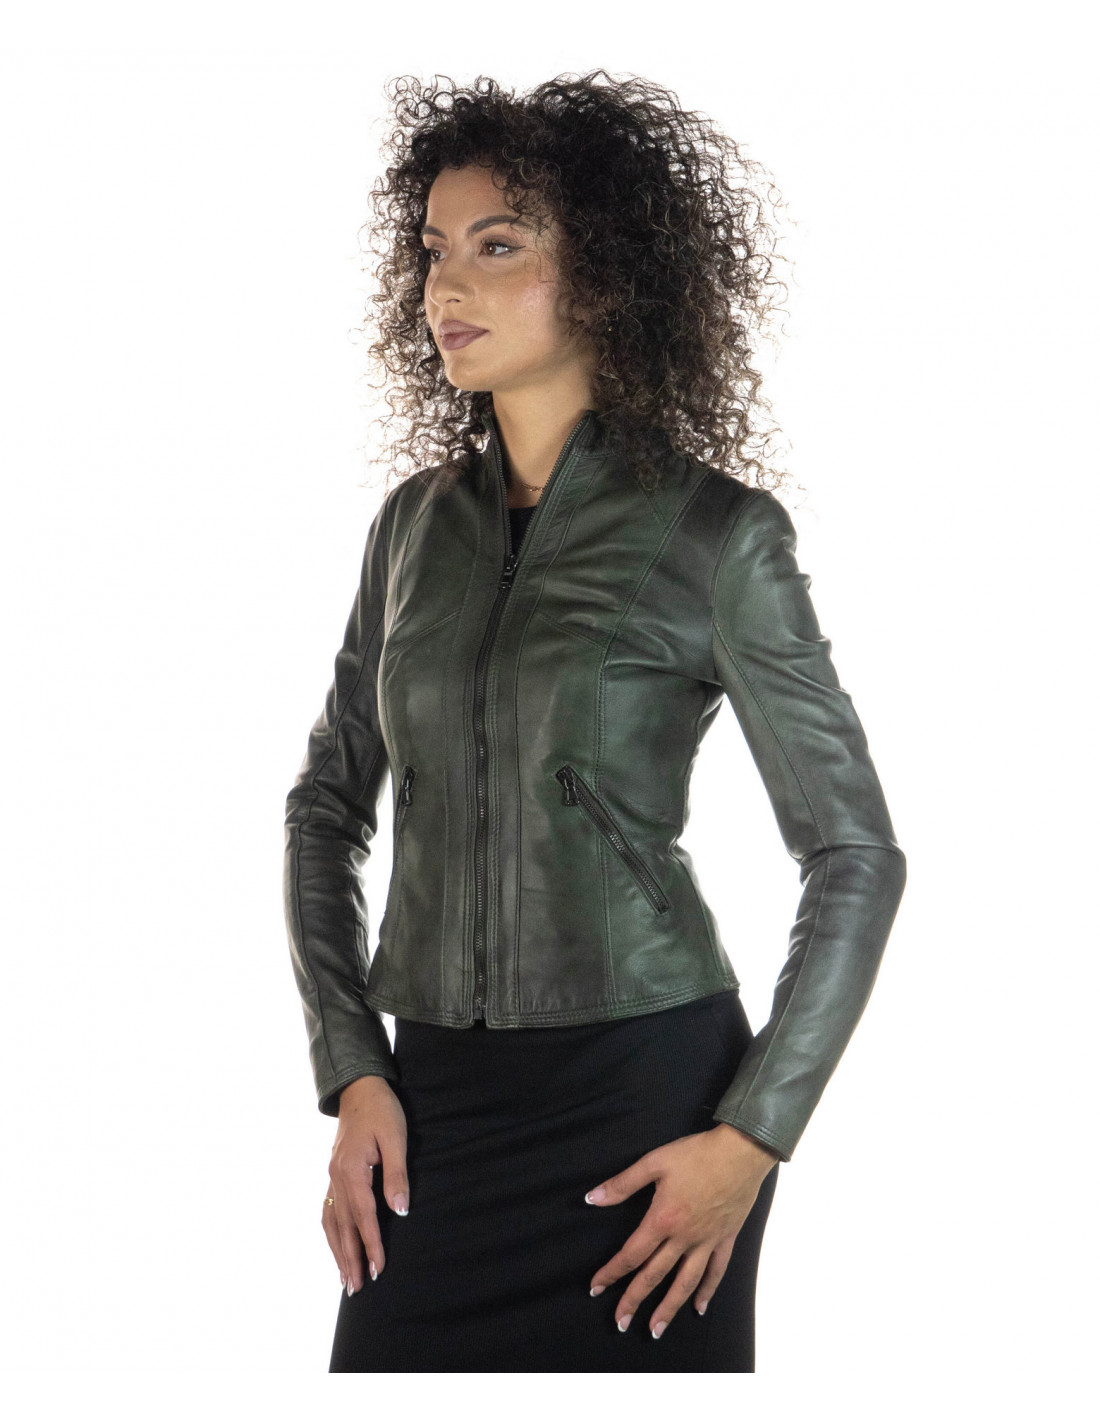 Woman jacket mod. Zara in genuine Green leather 100% made in Italy